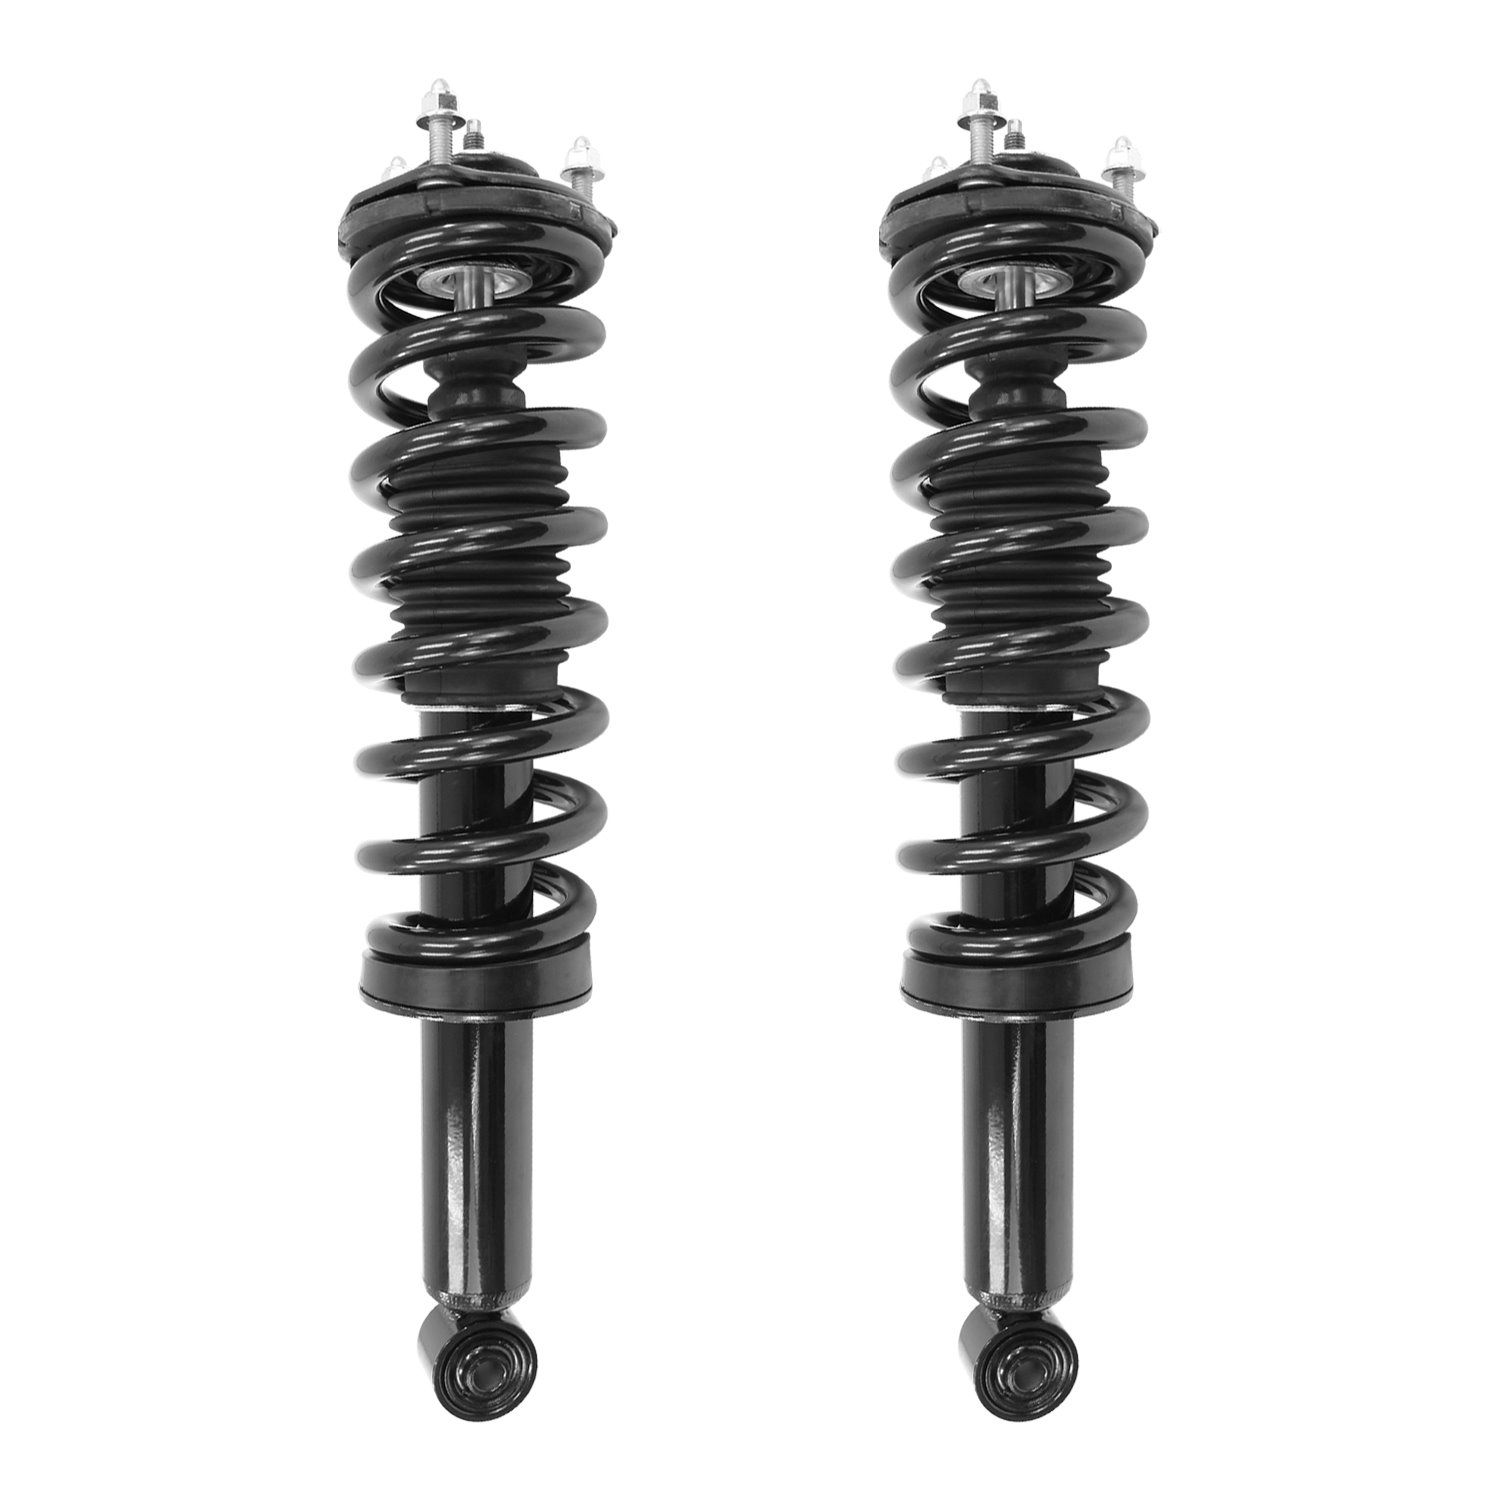 2-13560-001 Front Suspension Strut & Coil Spring Assemby Set Fits Select Chevy Colorado, GMC Canyon